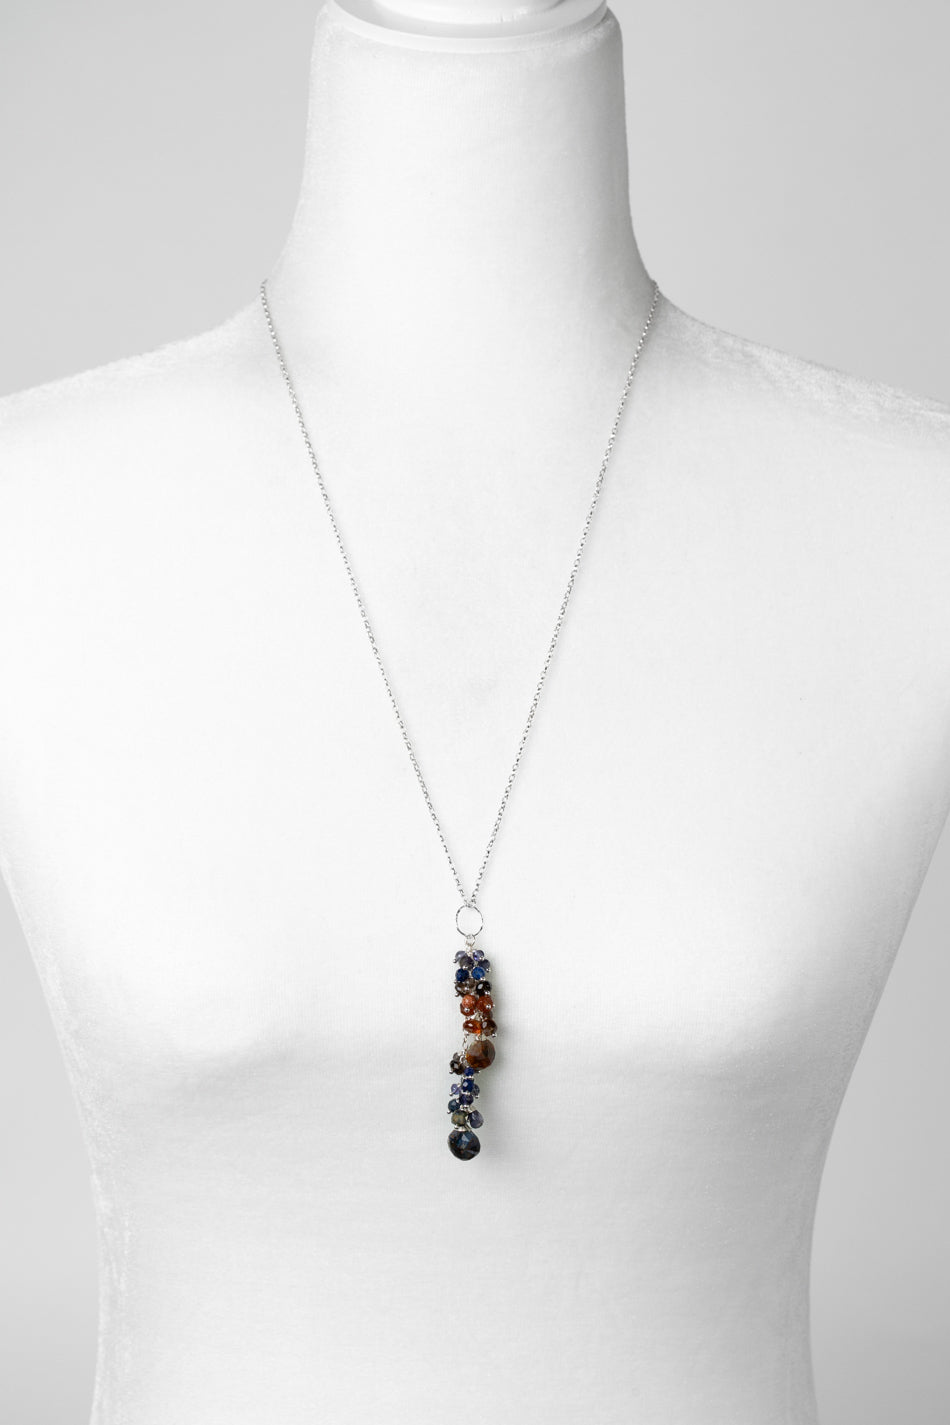 Limited Edition 25.5-27.5" Hessonite Garnet, Lapis Lazuli, Iolite With Faceted Pietersite Briolettes Cluster Necklace